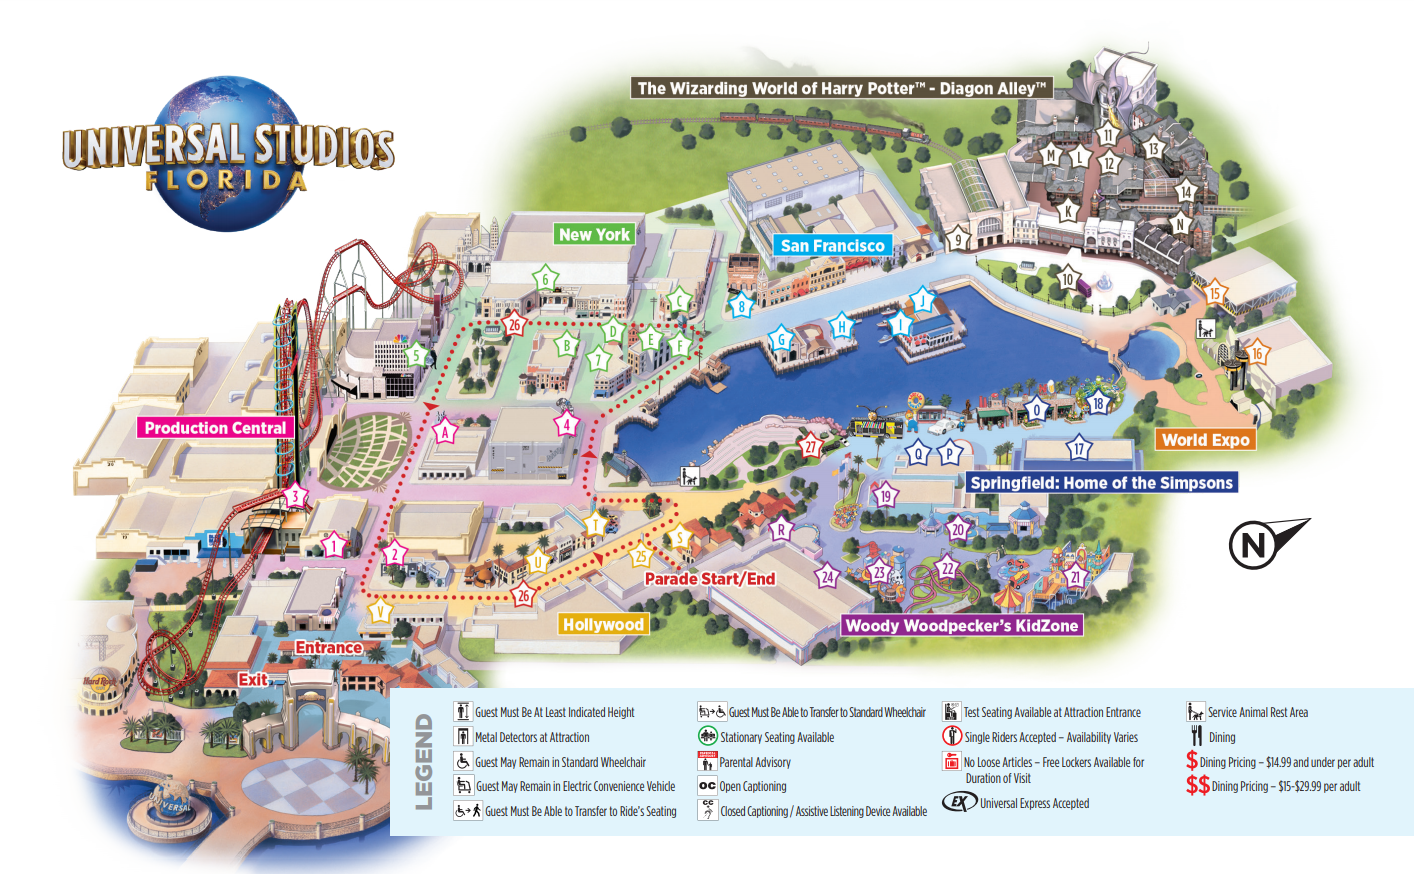 This is the map of Universal Studios Florida park. Shrek 4-D is at "Production Central".